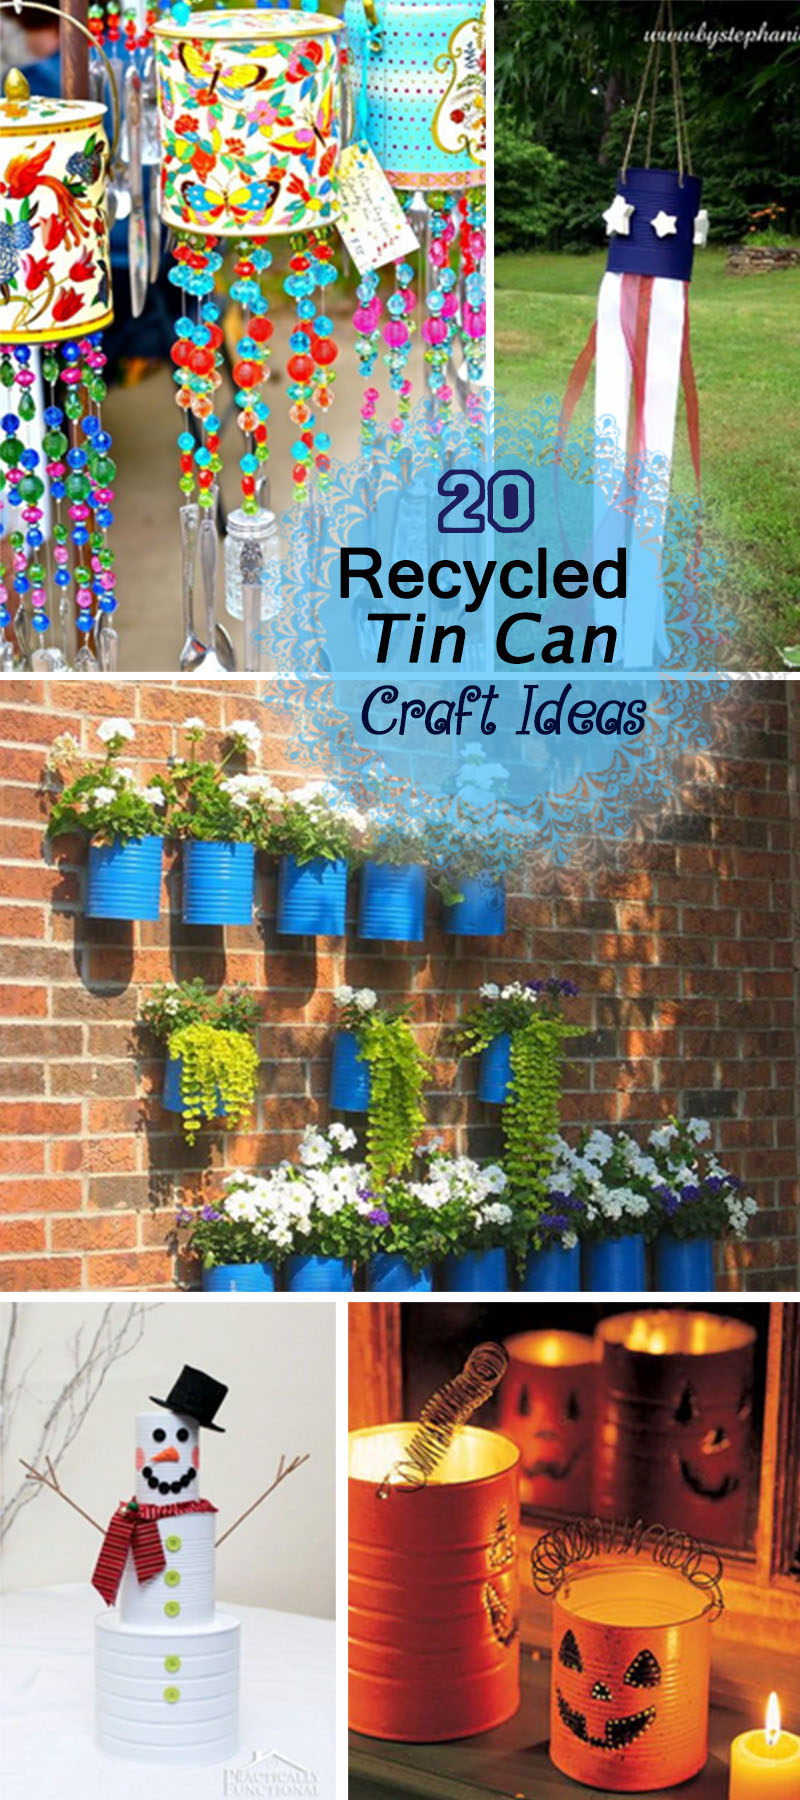 Creative Recycled Tin Can Craft Ideas!